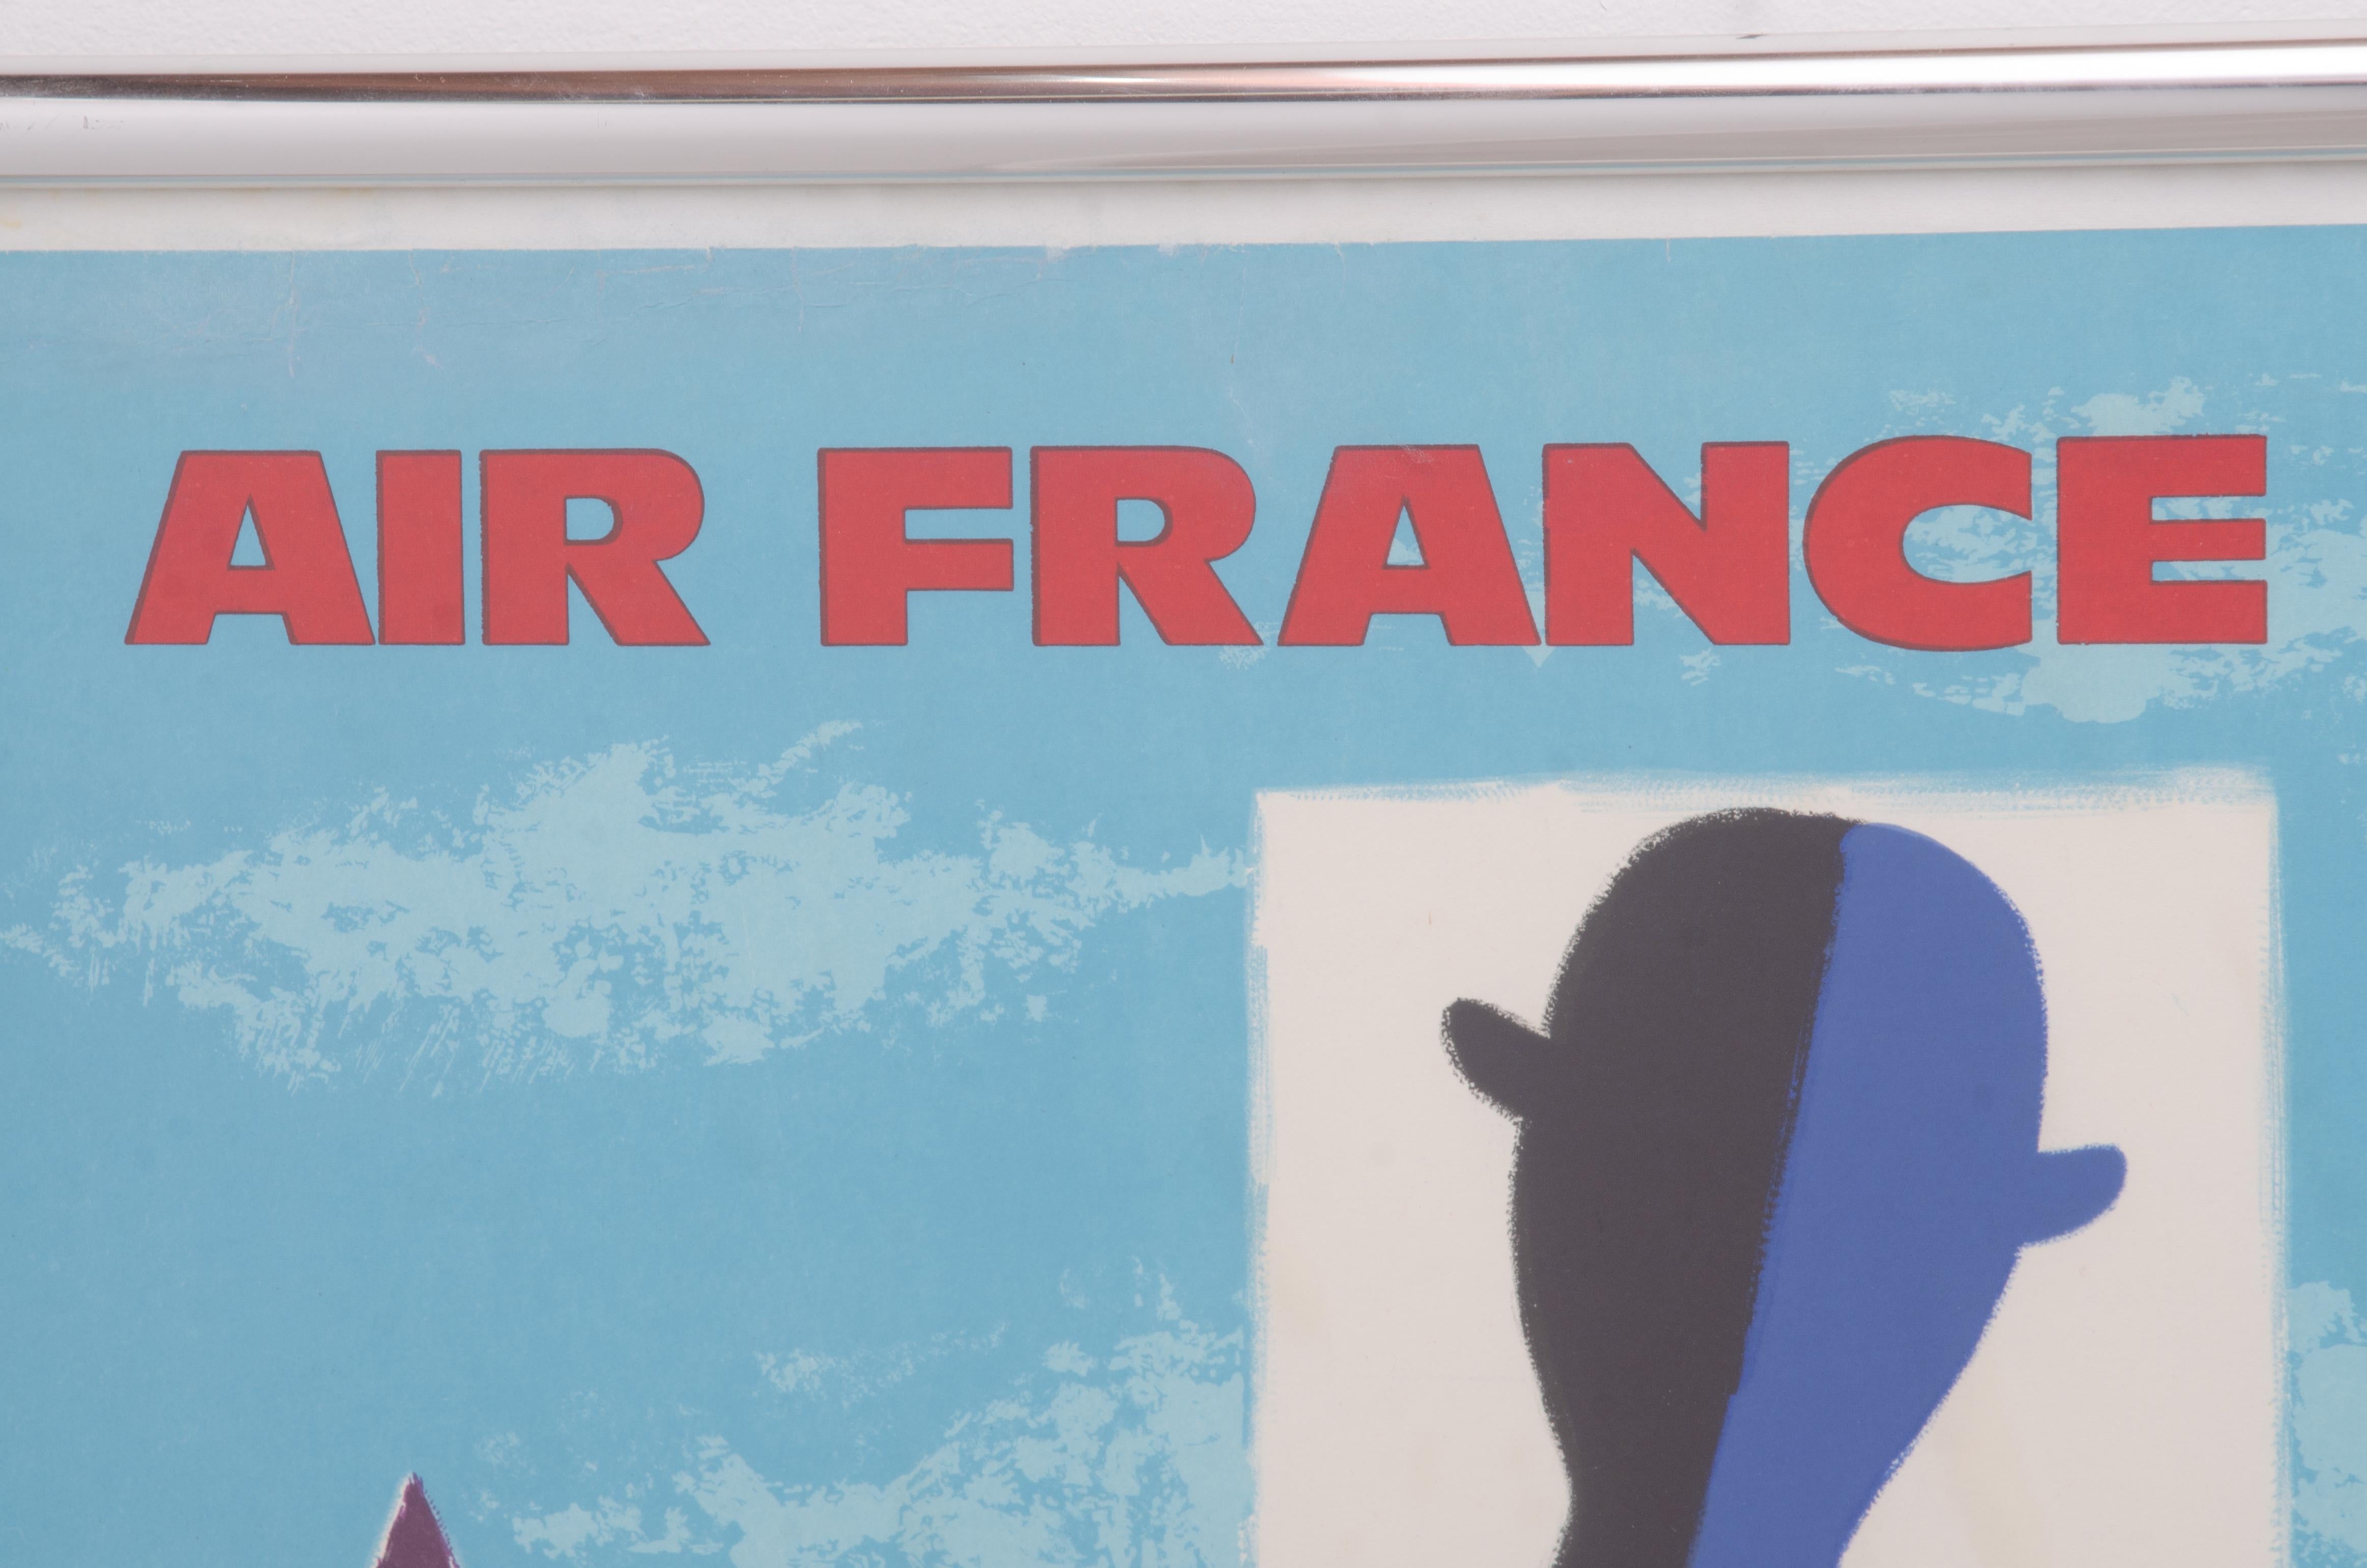 Original 1963 Air France travel/Destination poster by Guy Georget promoting Great Britain. A fantastic Mid Century modern poster design. This is the english text version, not the French 